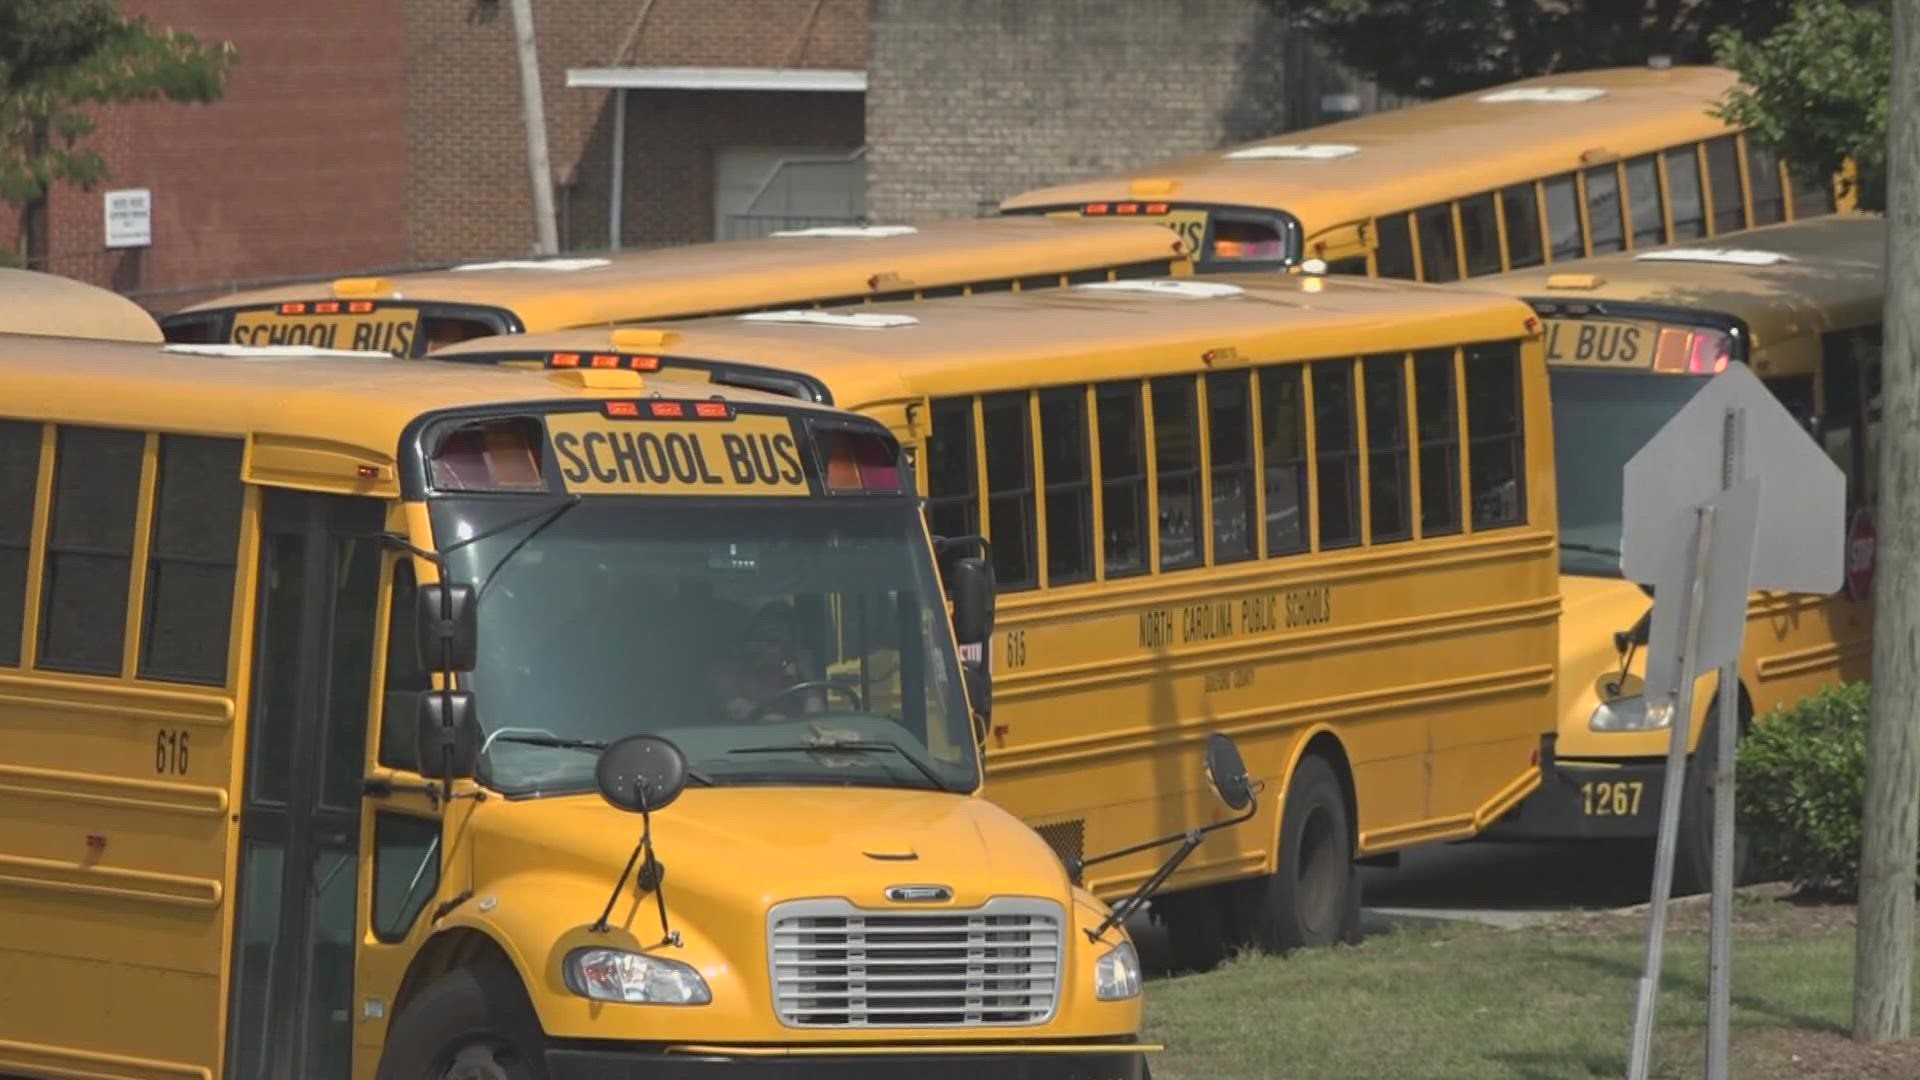 The district said it has job openings from school bus drivers to maintenance staff.